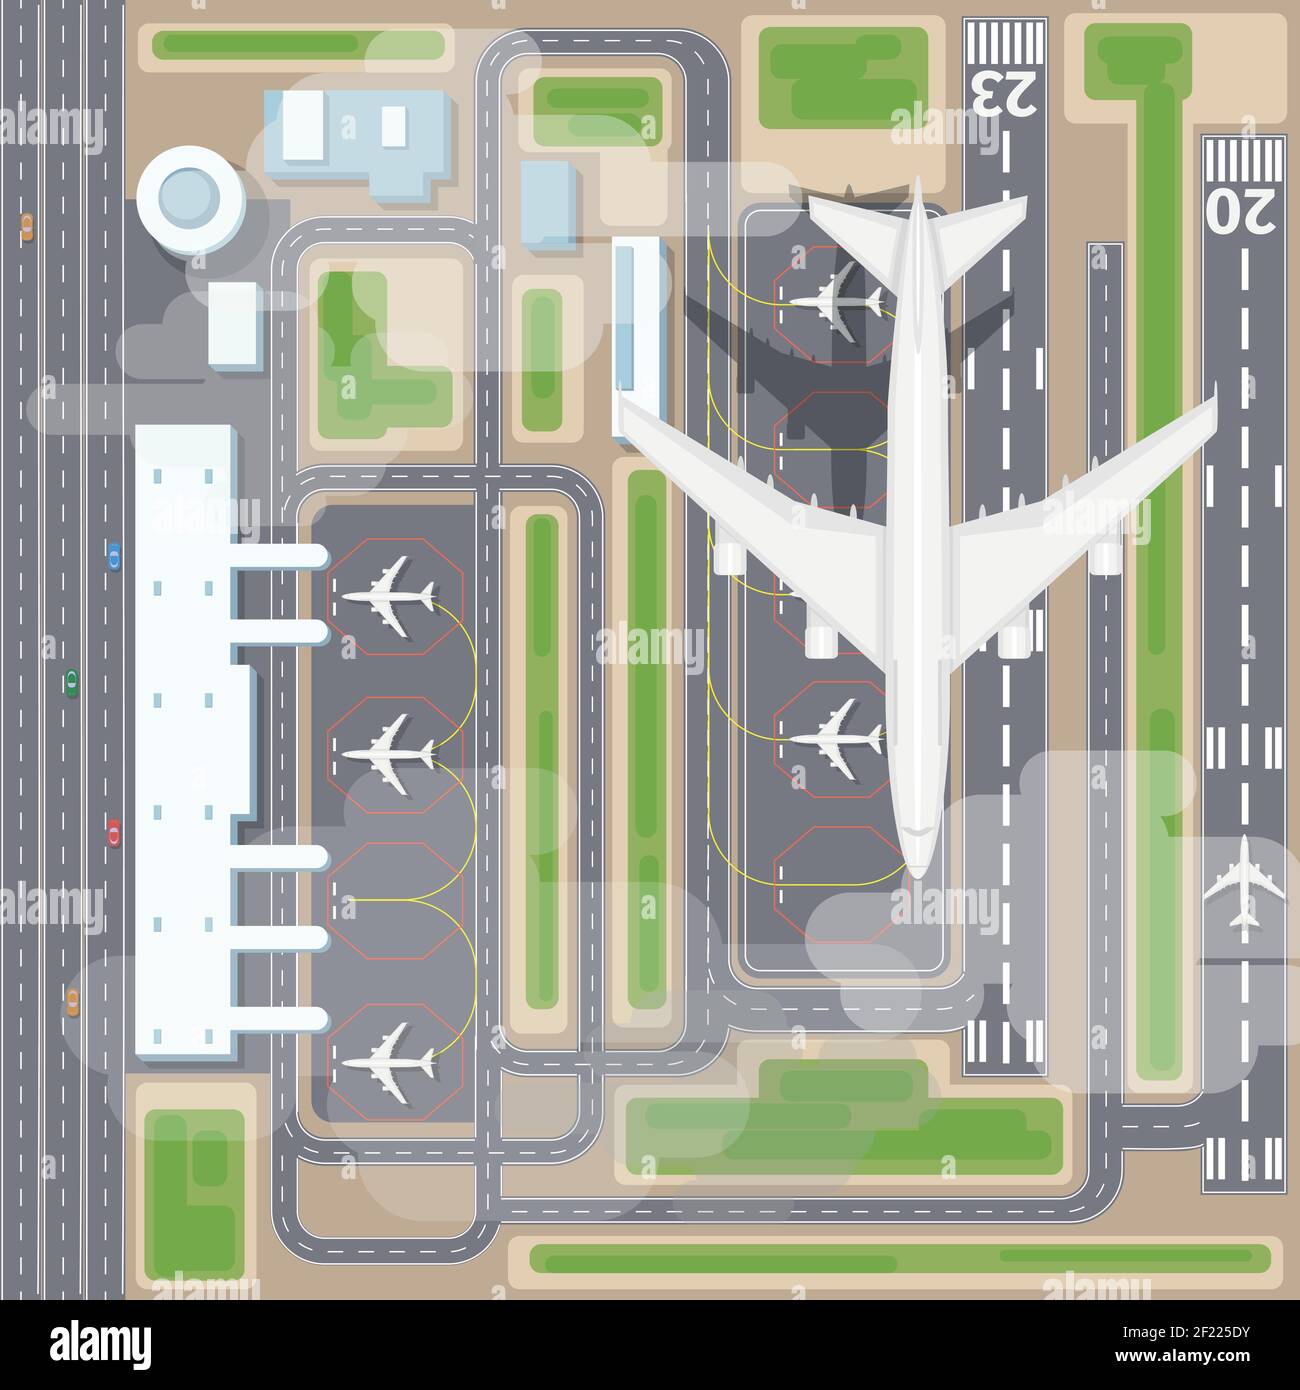 Airport landing strips top view. Aircraft and airplane, arrival, transport airline. Airport landing vector illustration Stock Vector